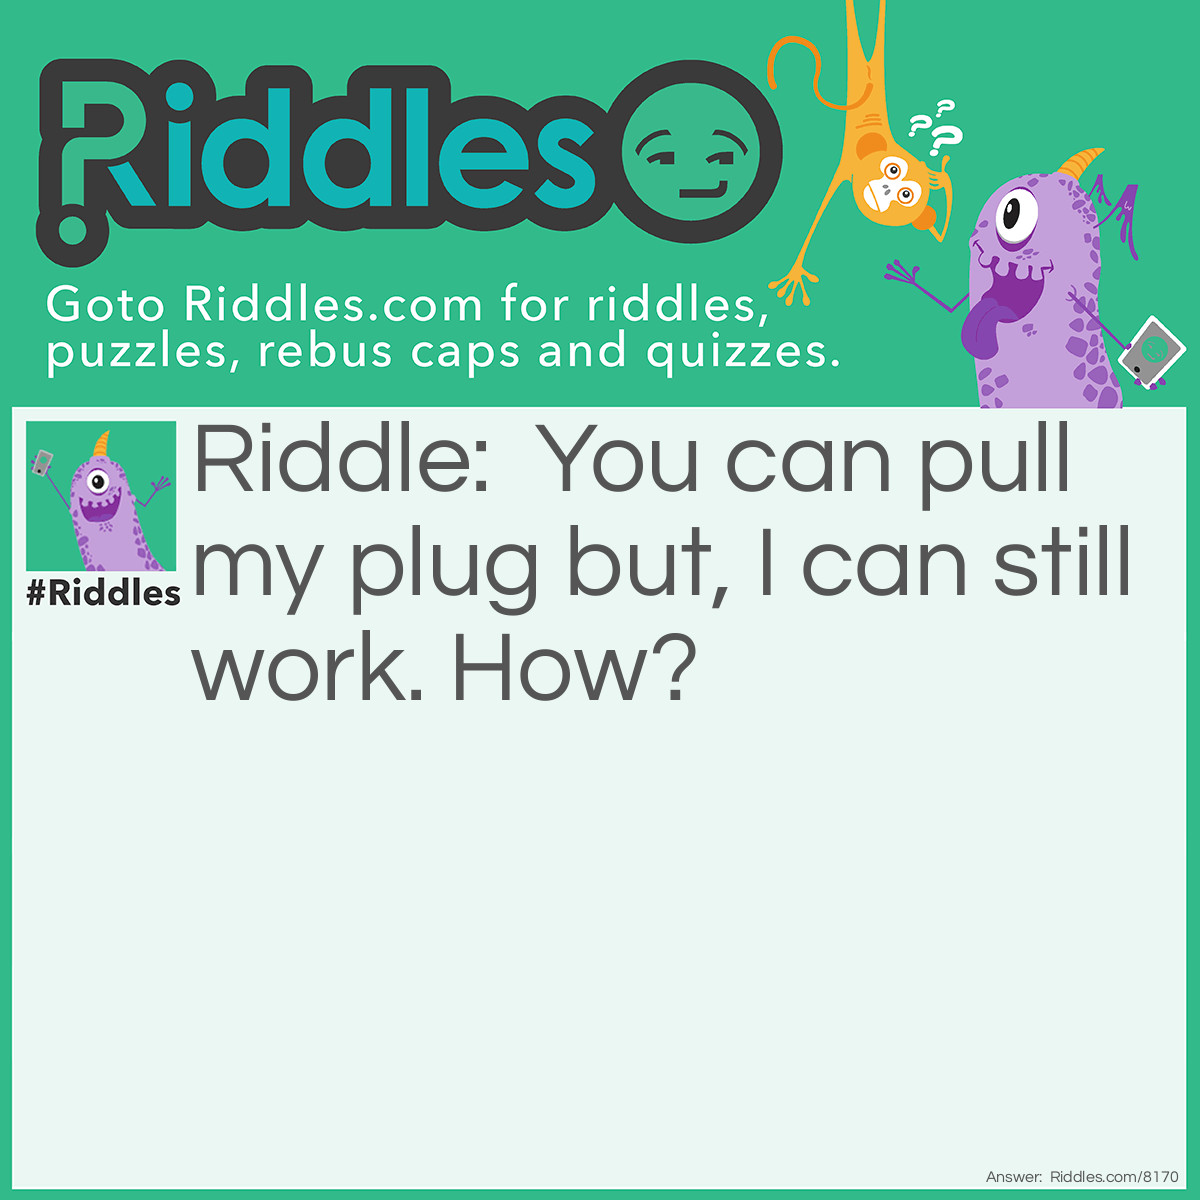 Riddle: You can pull my plug but, I can still work. How? Answer: Solar panels.